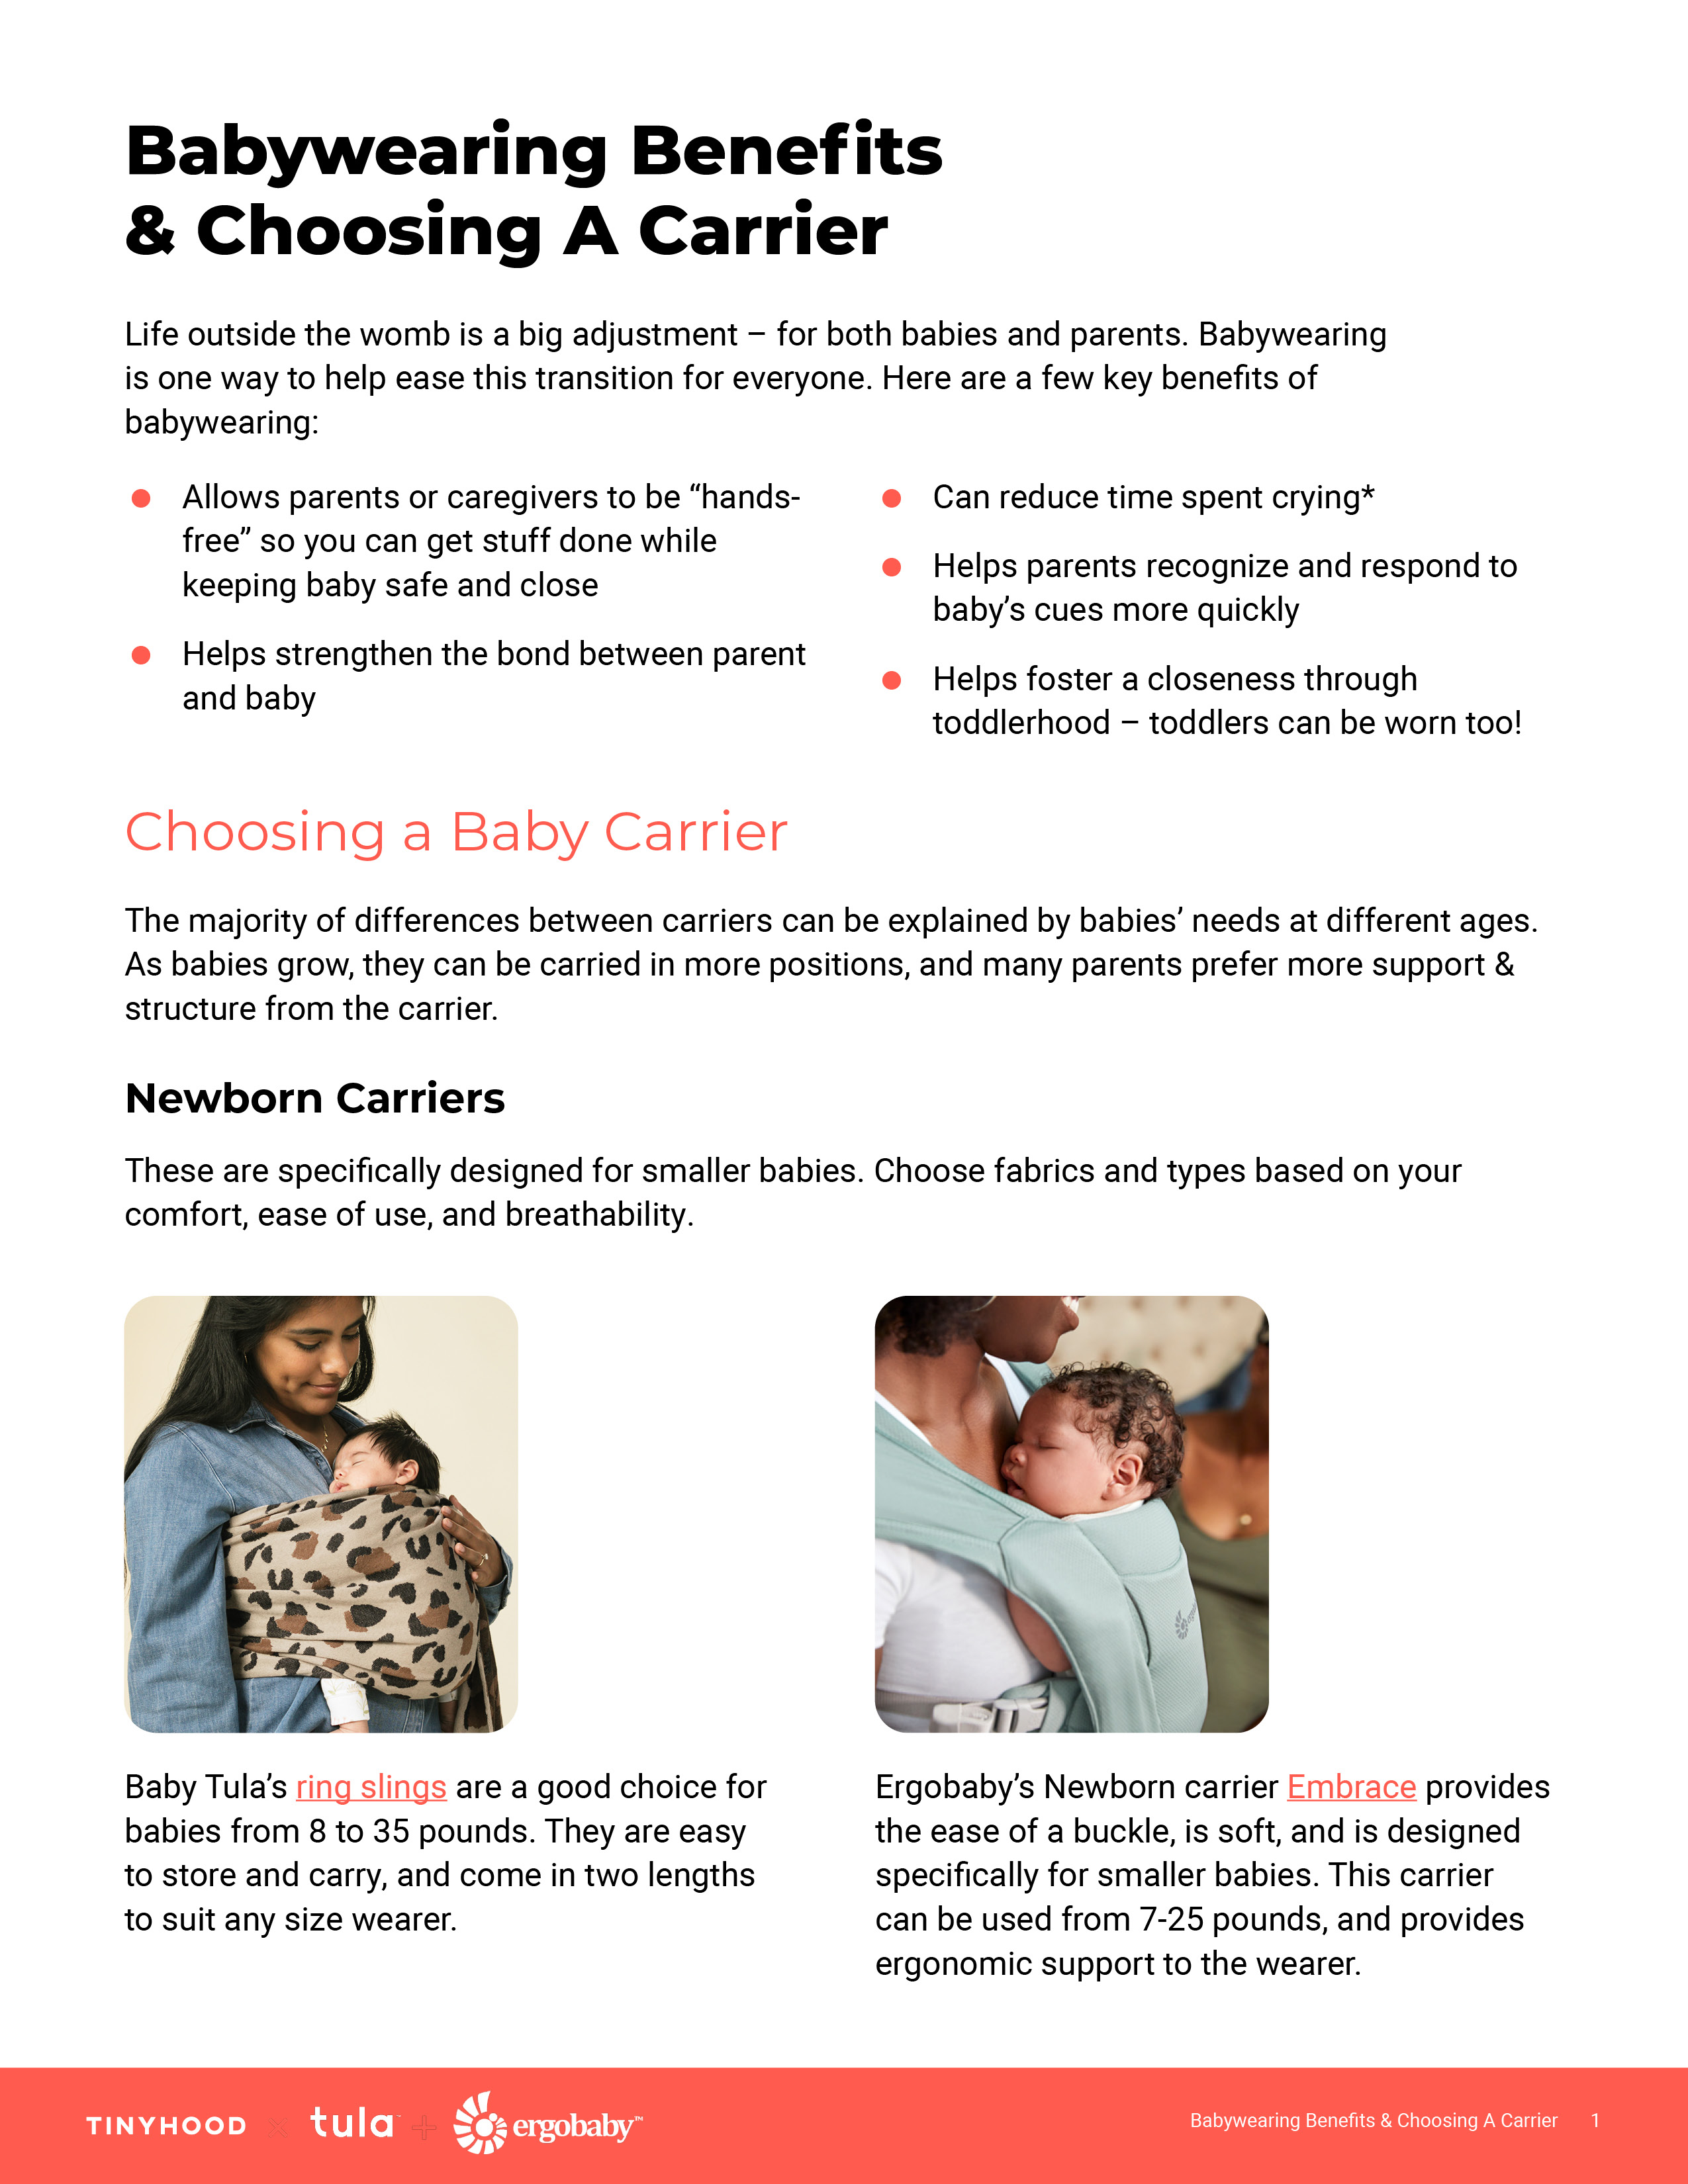 Postpartum: A Guide to Caring for You and Baby after Birth